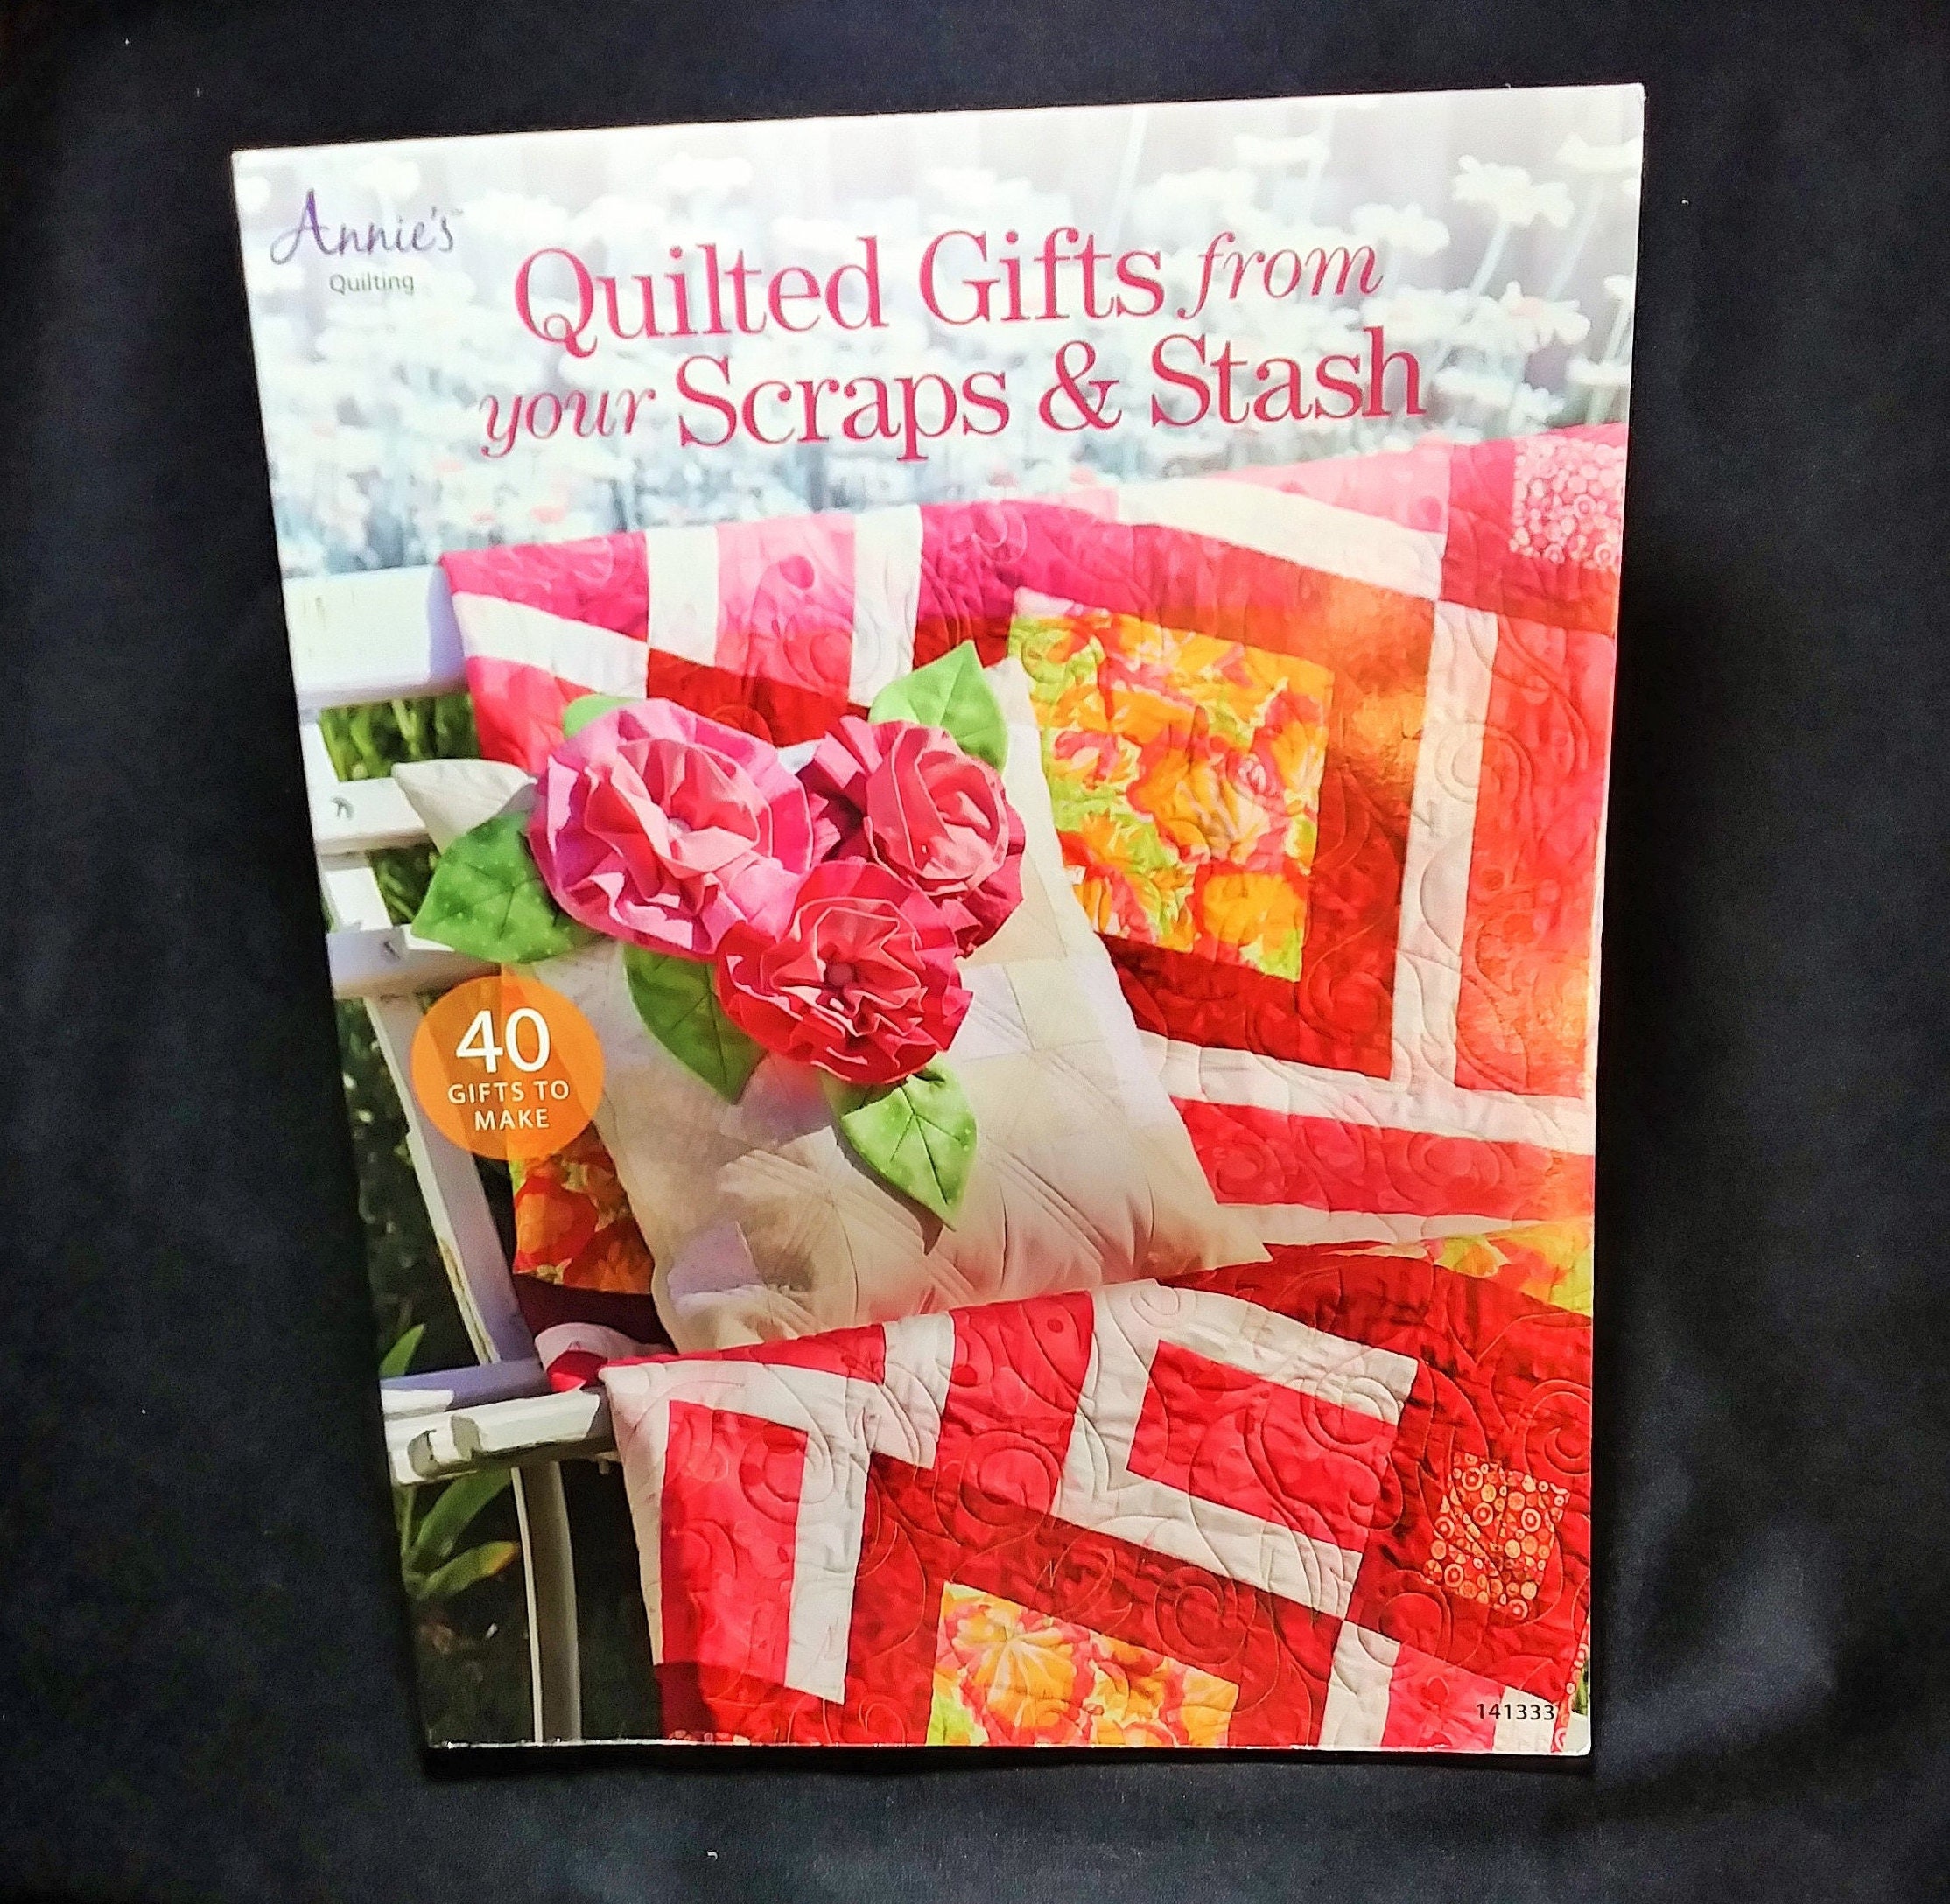 Quilted Gifts from your Scraps & Stash